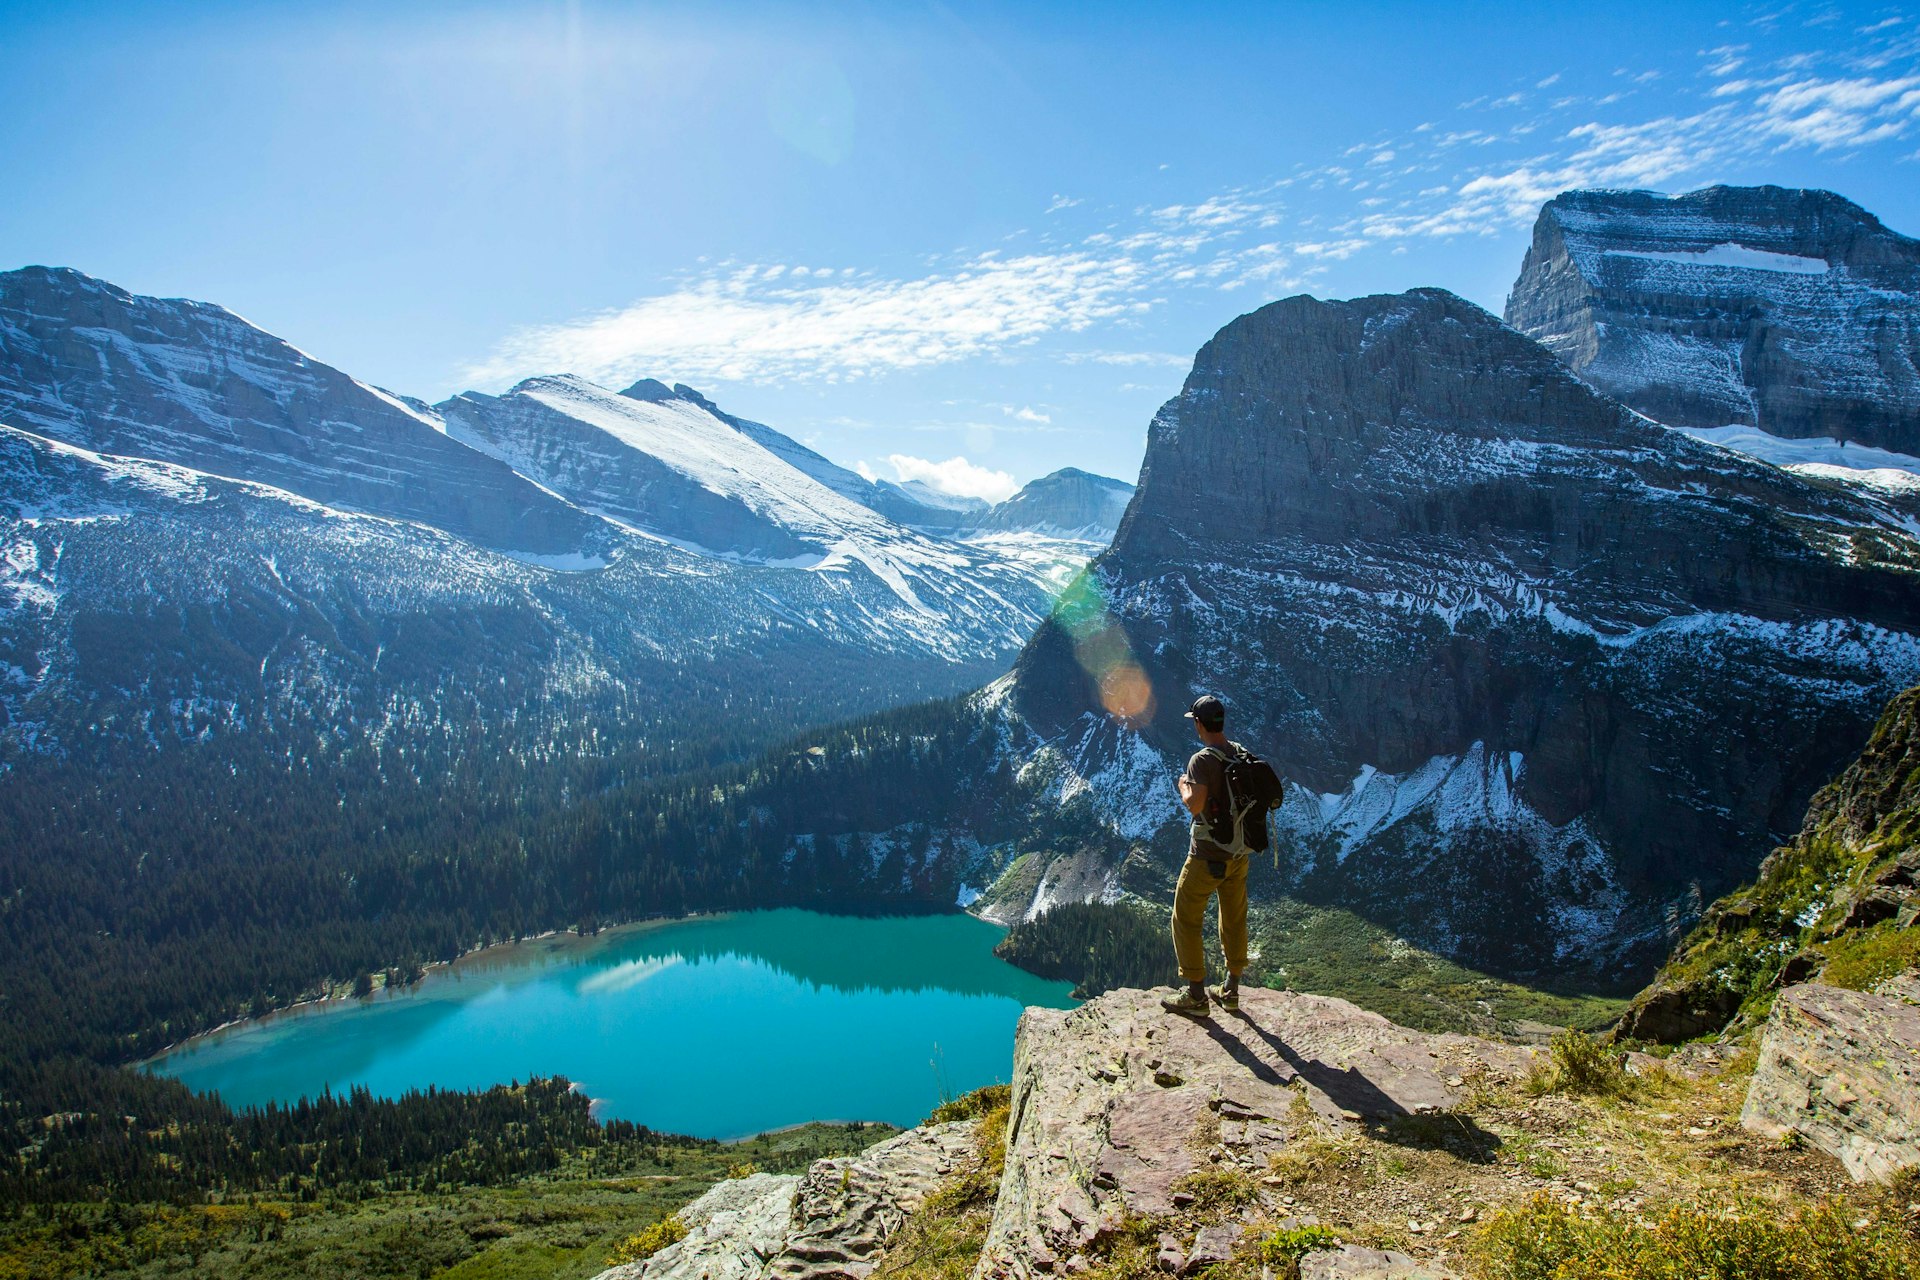 A man looks over a turquoise lake in Glacier National Park. Image by Jordan Siemens / Taxi / Getty